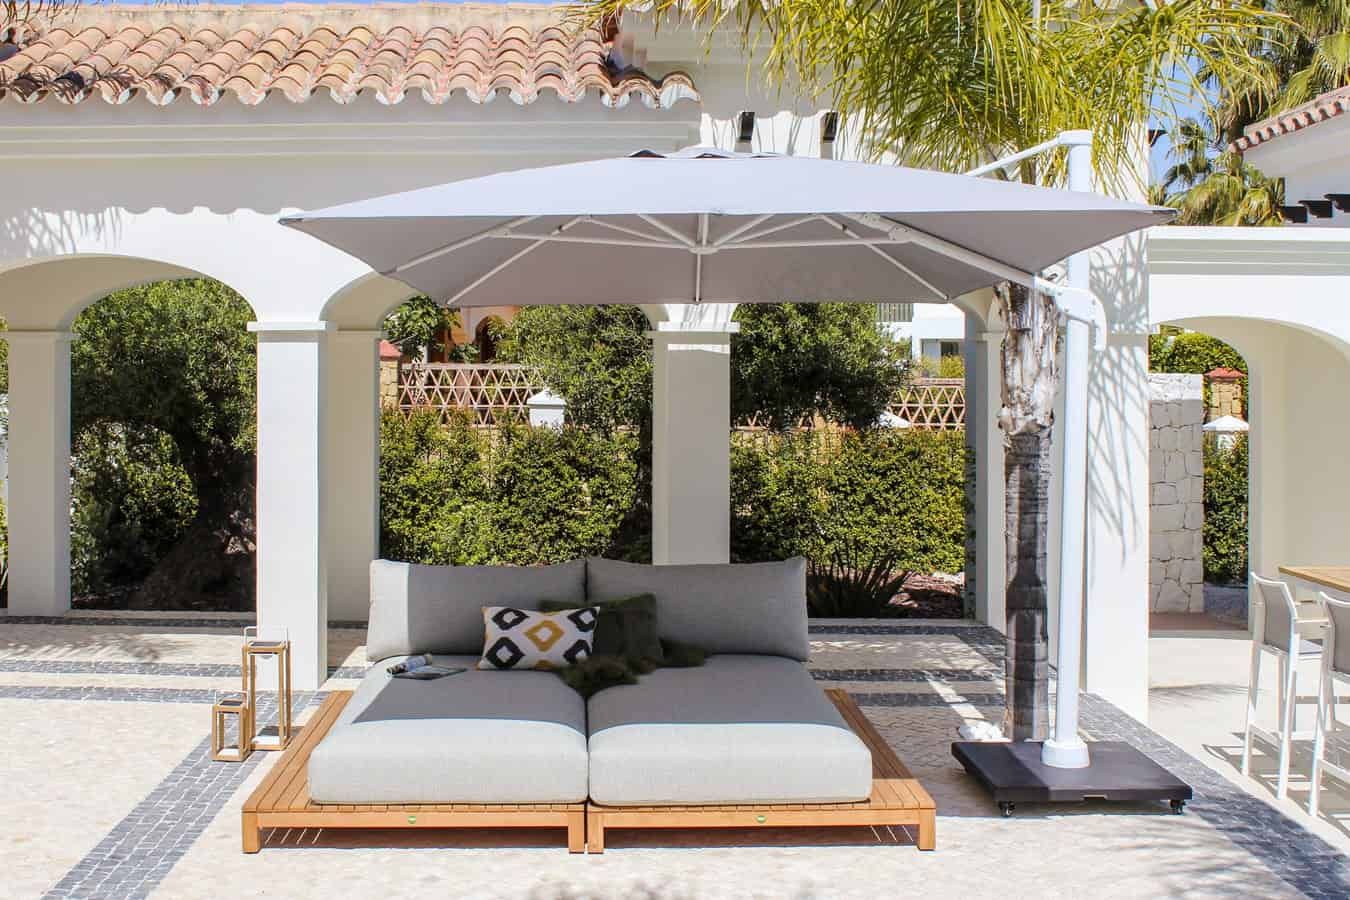 Builded with First-Class Material: SunsLifestyle Pantalla SUNS Lifestyle Vườn phong cách hiện đại Parasol - outdoor parasol - garden parasol - outdoor umbrella - umbrella - garden umbrella - garden shade - shade - outdoor shade - Designer garden - Designer garden furniture - Designer garden set - Designer outdoor chairs - Designer outdoor daybed - Designer outdoor furniture Lifestyle furniture - Outdoor lifestyle furniture - lifestyle garden furniture - Outdoor furniture shop - Garden furniture shop - Garden furniture shop - Outdoor furniture - Sunbrella - Sunbrella fabric - Sunbrella furniture - Sunbrella garden furniture - Sensotex - Sensotex fabric - Sensotex furniture - Textaline - outdoor sofa set - outdoor dining - outdoor lounge - garden sofa set - garden lounge - garden dining - alfresco - garden sofa - garden chair - day bed - daybed - sun lounger - sunbed - sun bed - outdoor space - waterproof - weatherproof - weather resistant - weather resillient - quick dry foam - teak - garden table - garden chair - outdoor table - outdoor chair - outdoor bar - aluminium - hardwood - ,Furniture